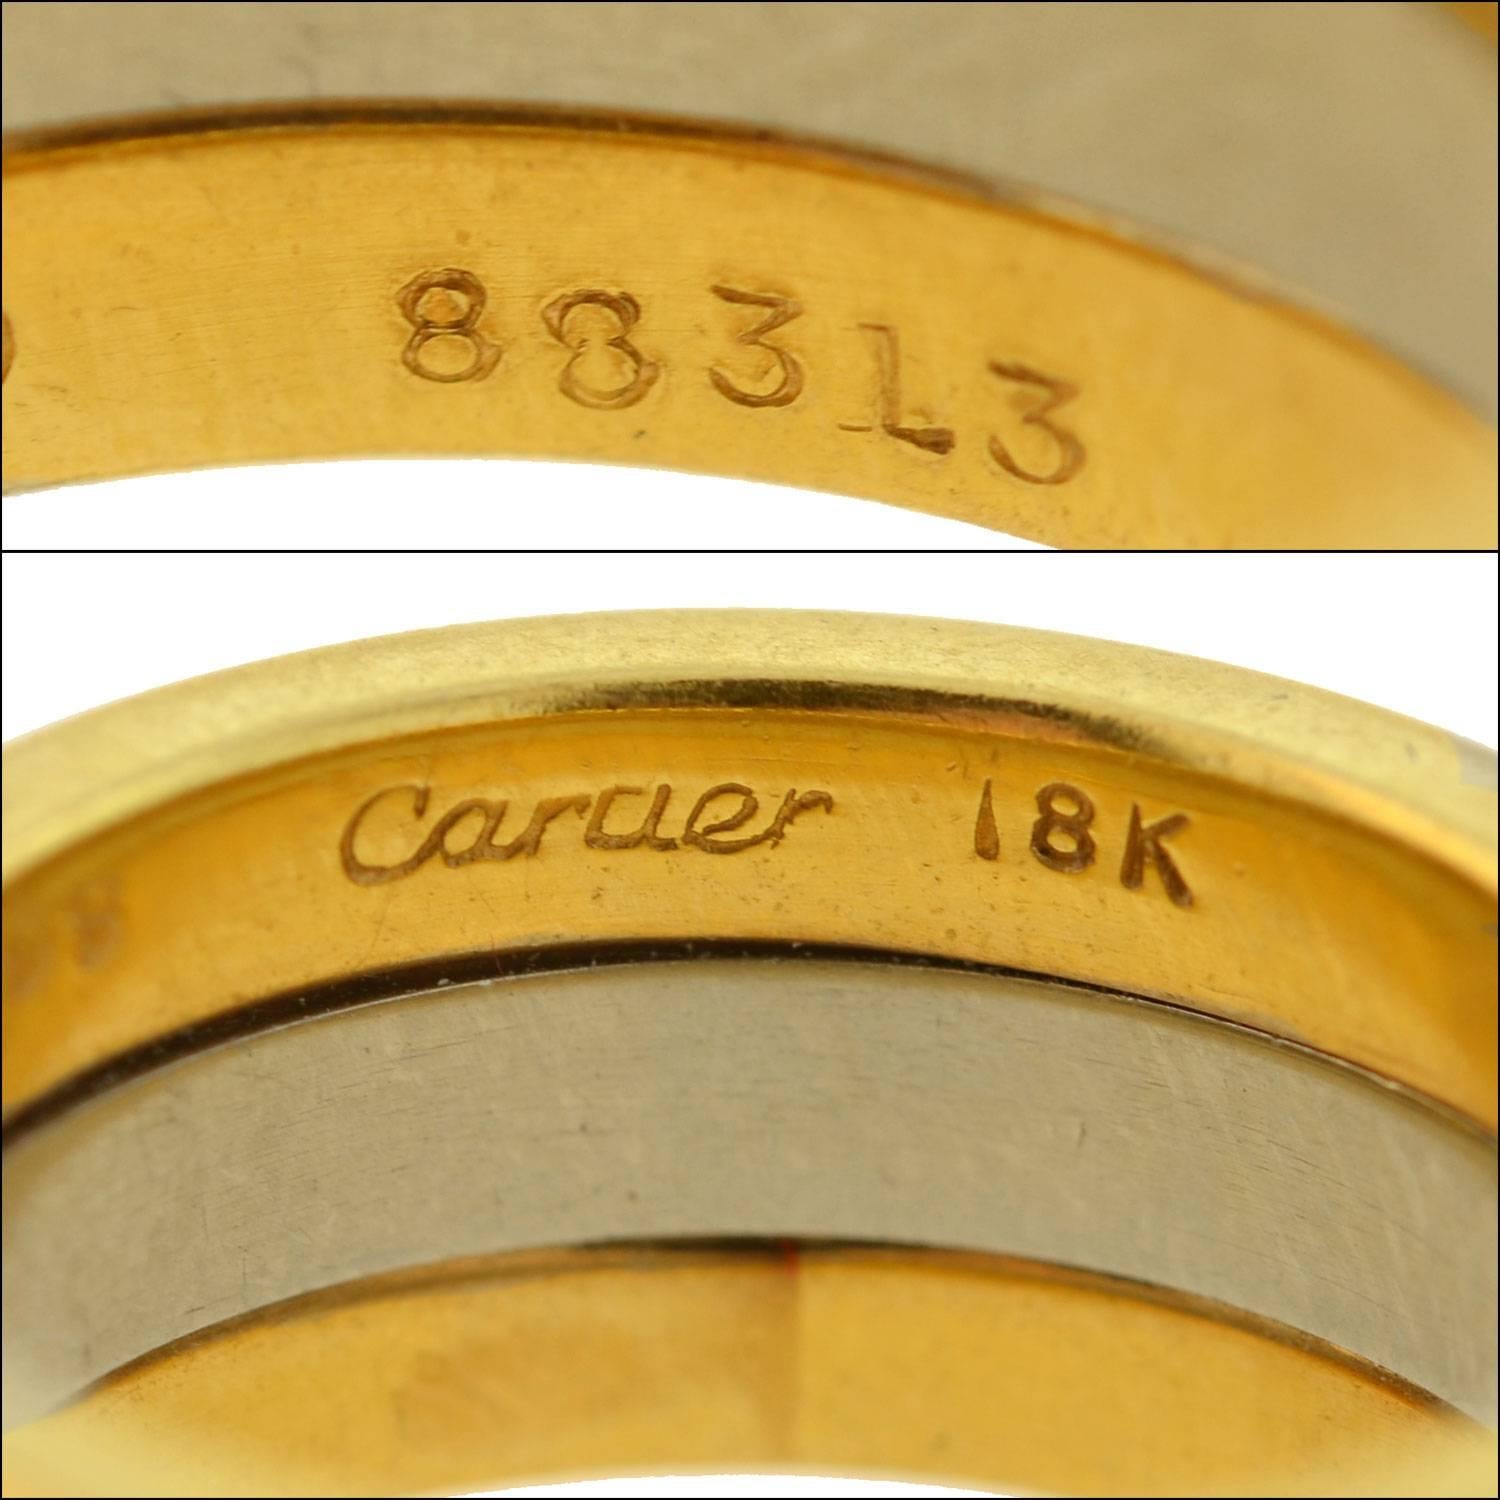 Contemporary Cartier Two-Tone Multi-Band Ring with Removable Center